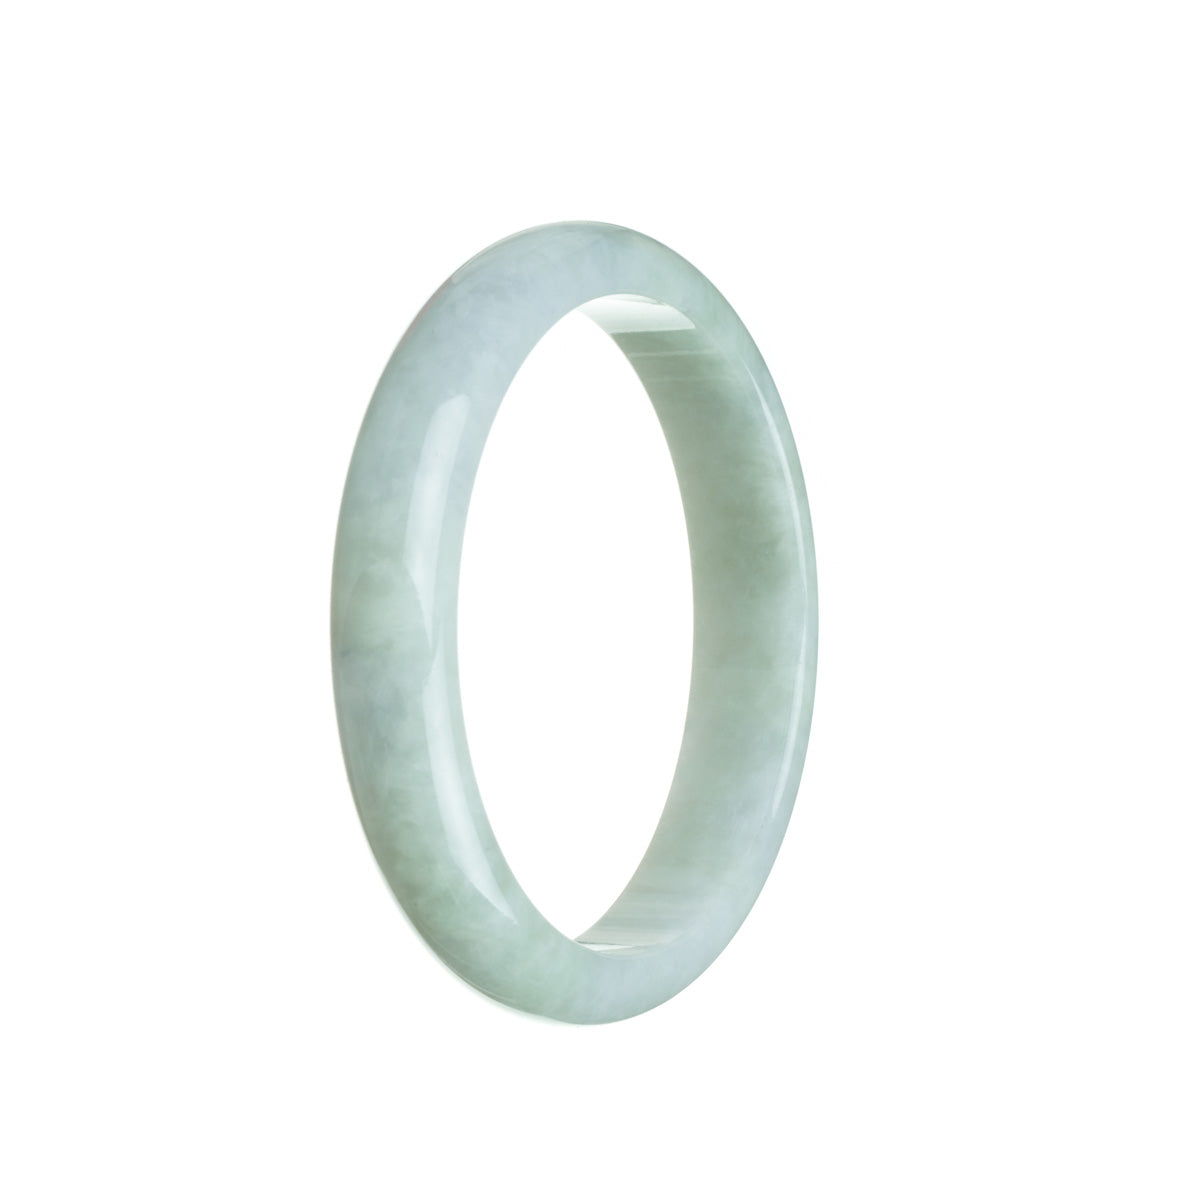 A beautifully crafted traditional jade bangle bracelet in pale green with subtle lavender undertones, featuring a 58mm half moon design.